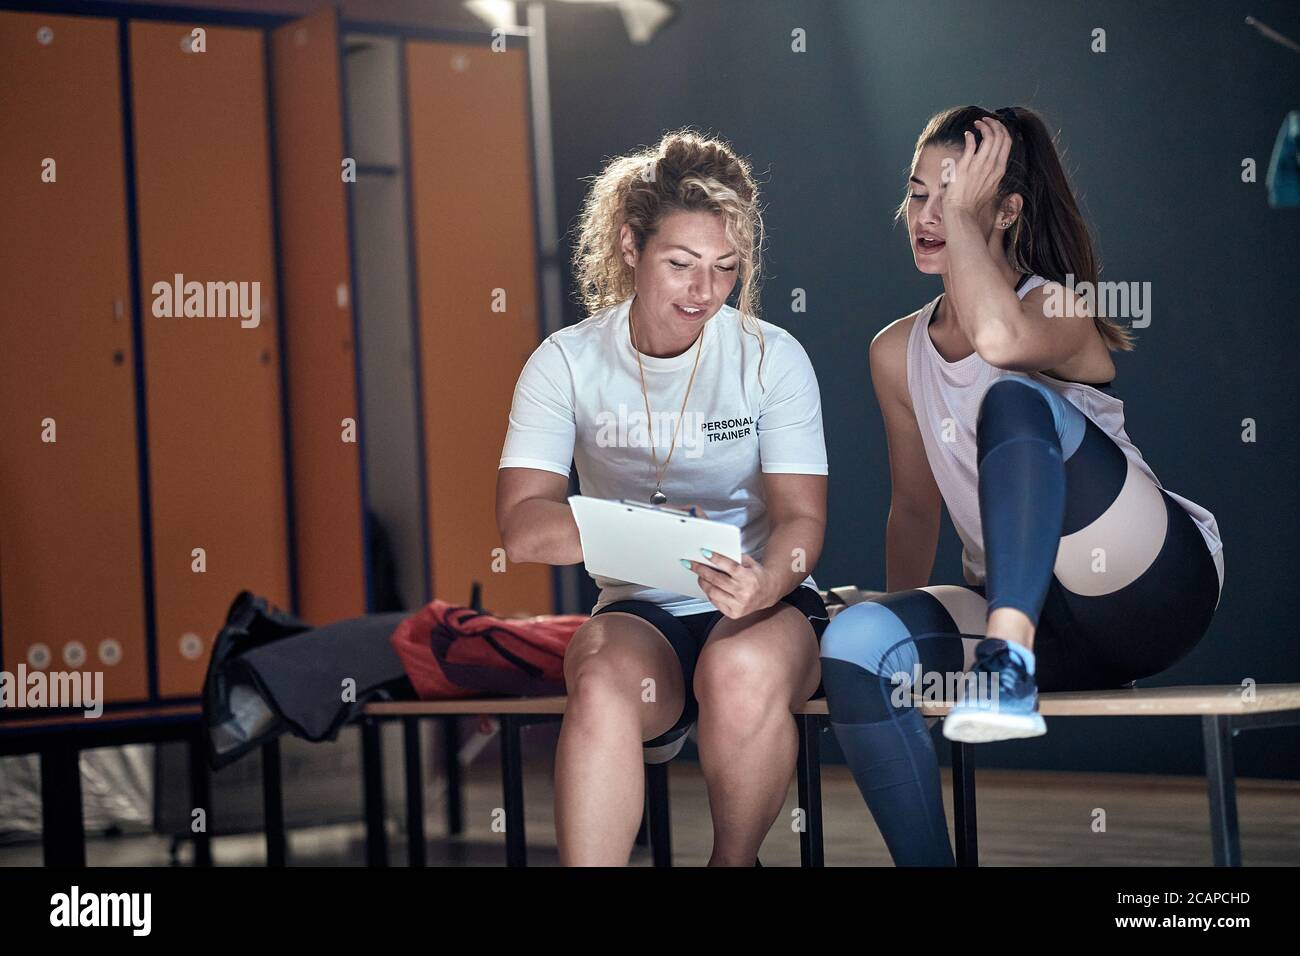 Female personal trainer and young fitness girl in a talk in a locker room Stock Photo